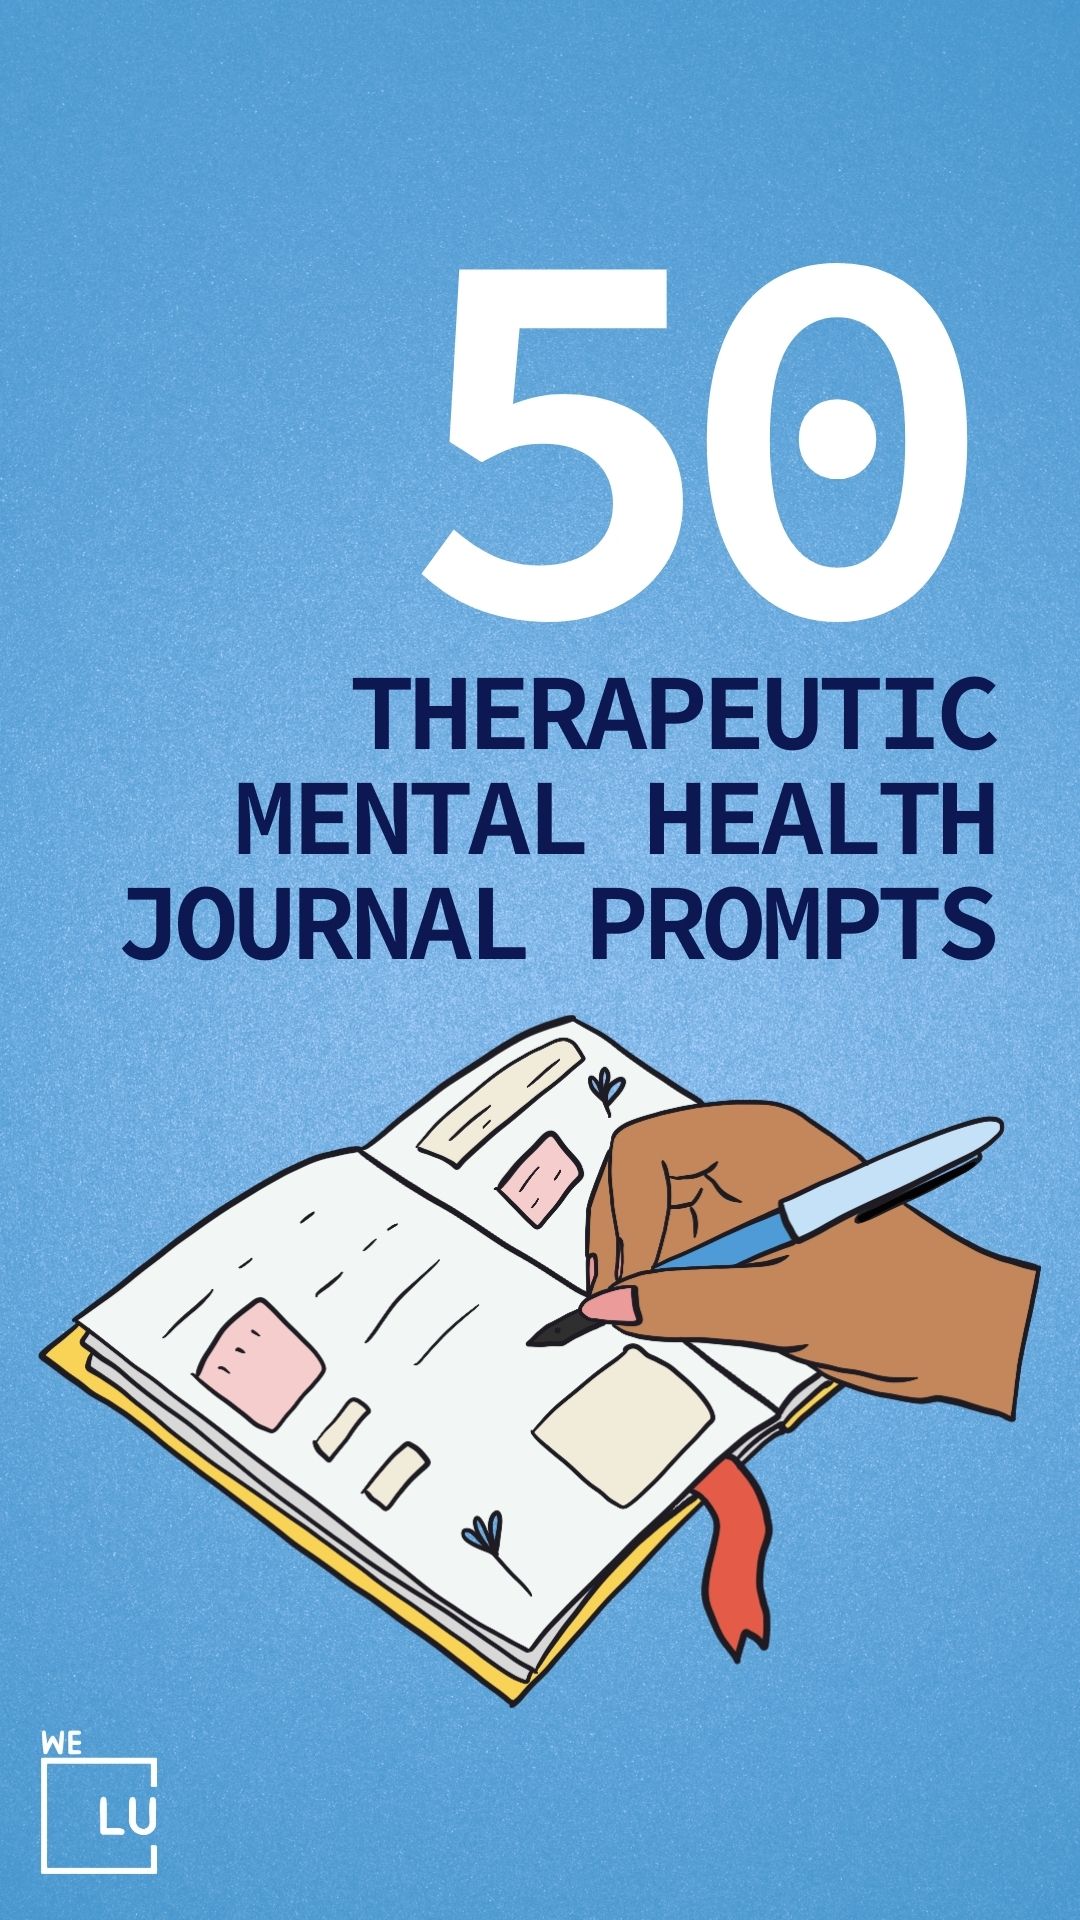 50 Therapeutic Mental Health Journal Prompts